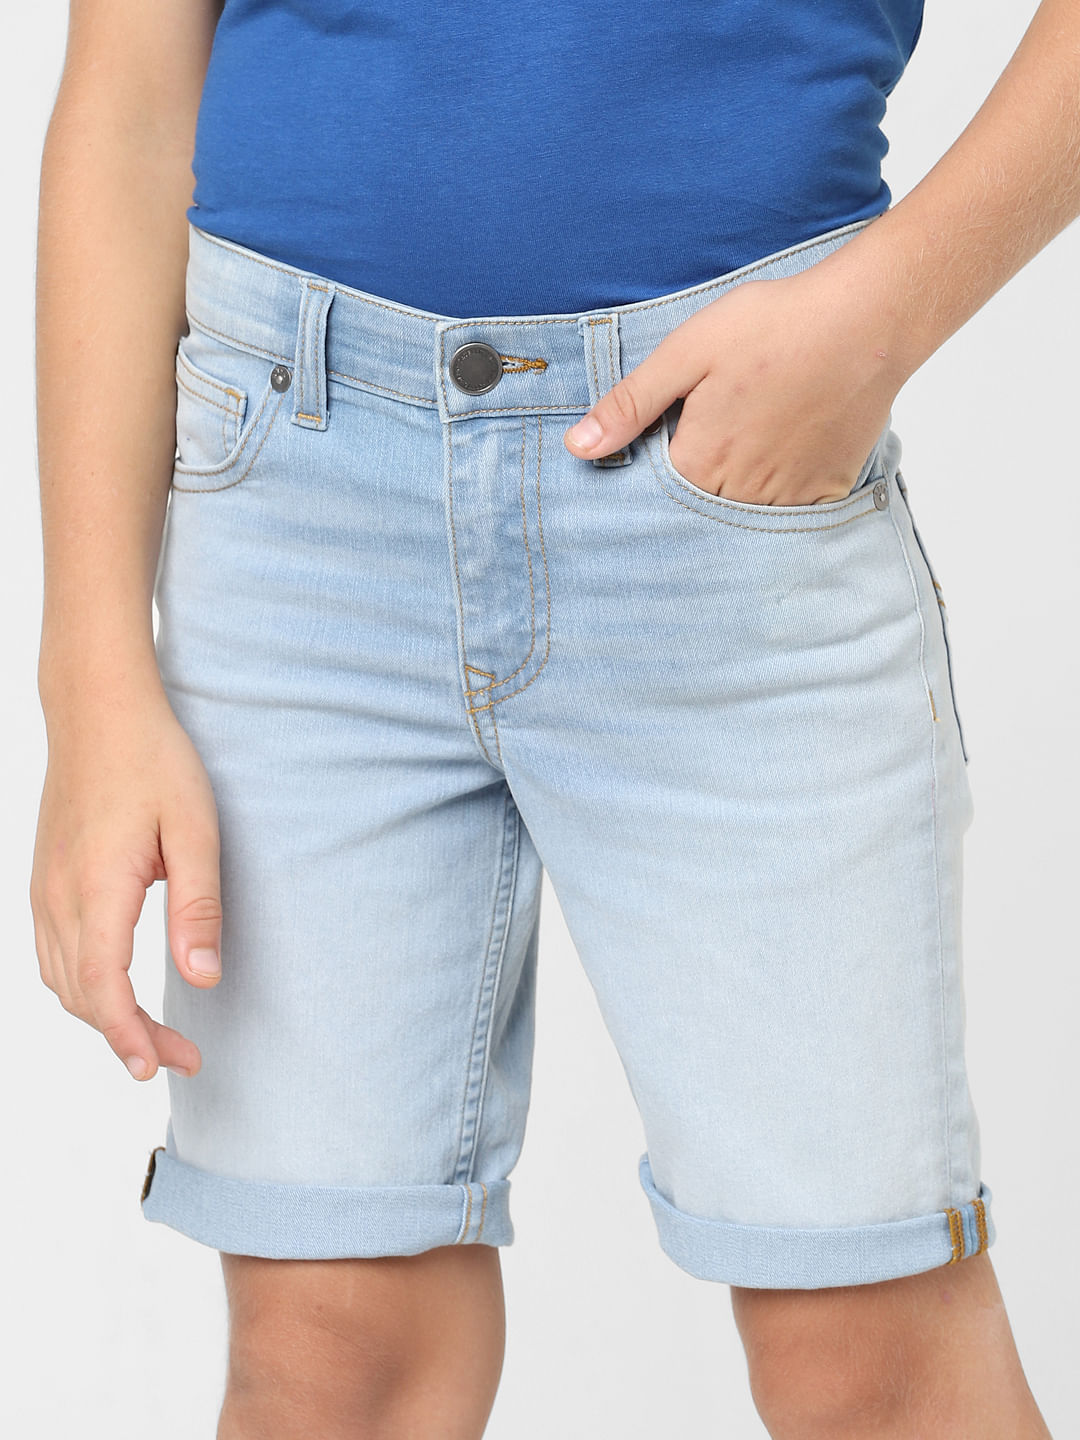 Sexy Dance Womens Ripped Denim Jeans Shorts Summer Stretch Rip India | Ubuy